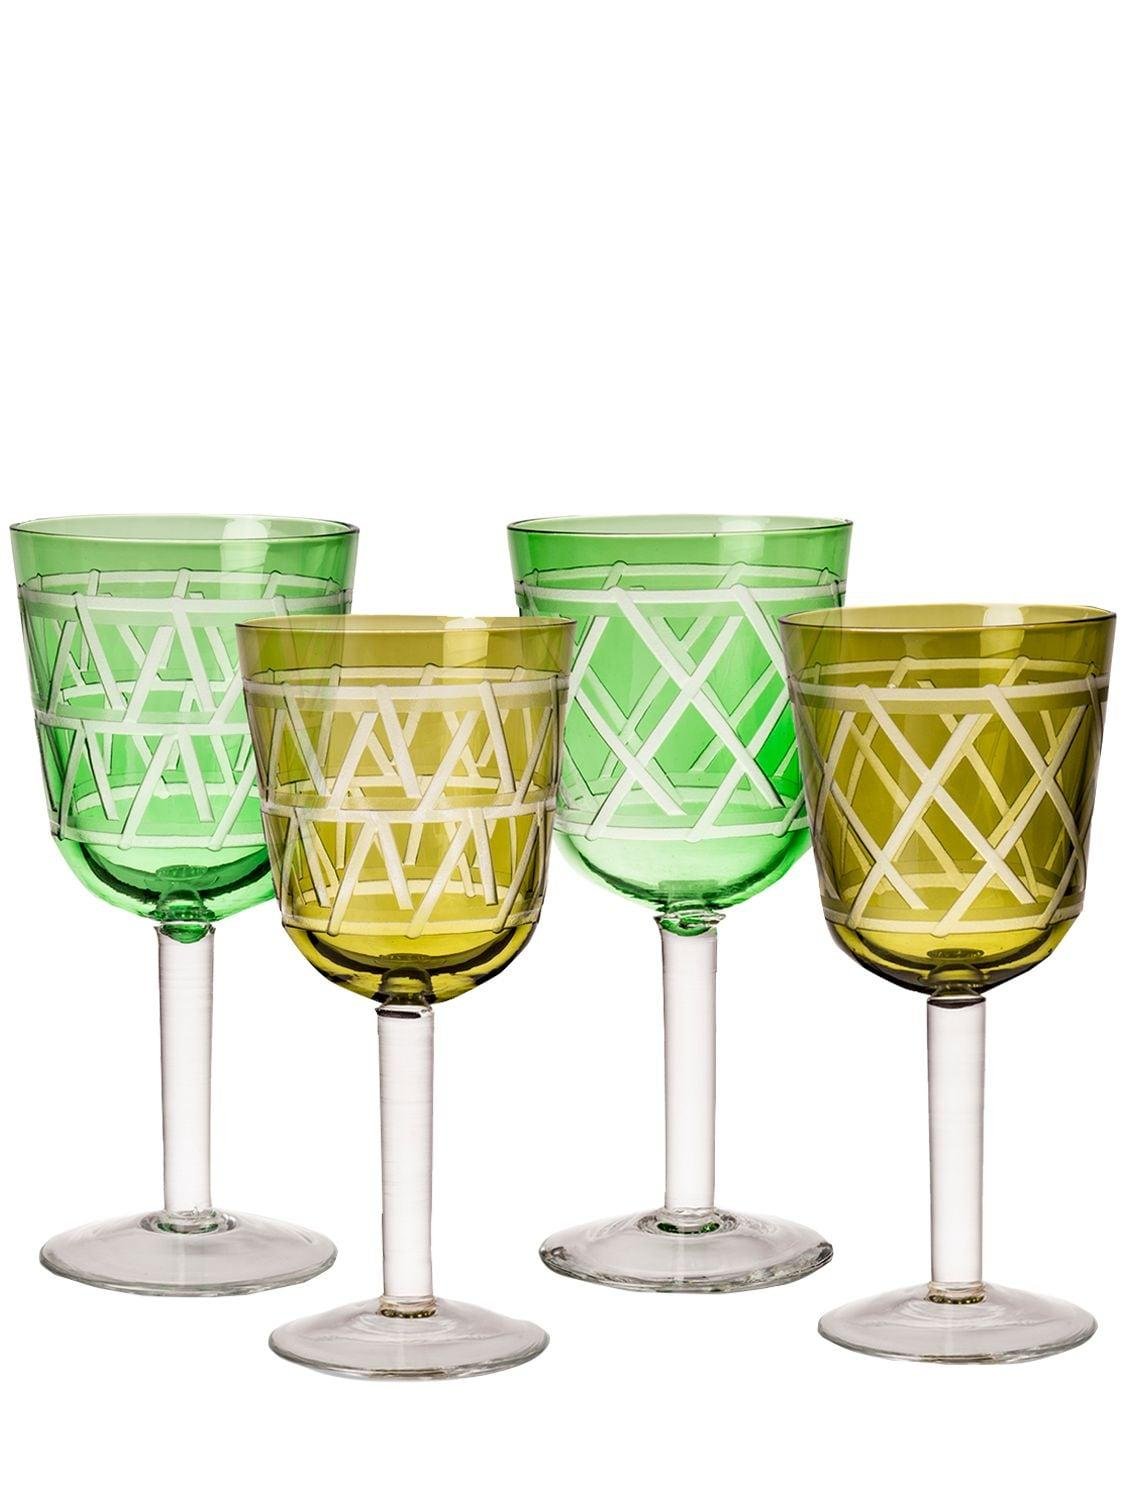 Tie Up Set Of 4 Wine Glasses by POLSPOTTEN